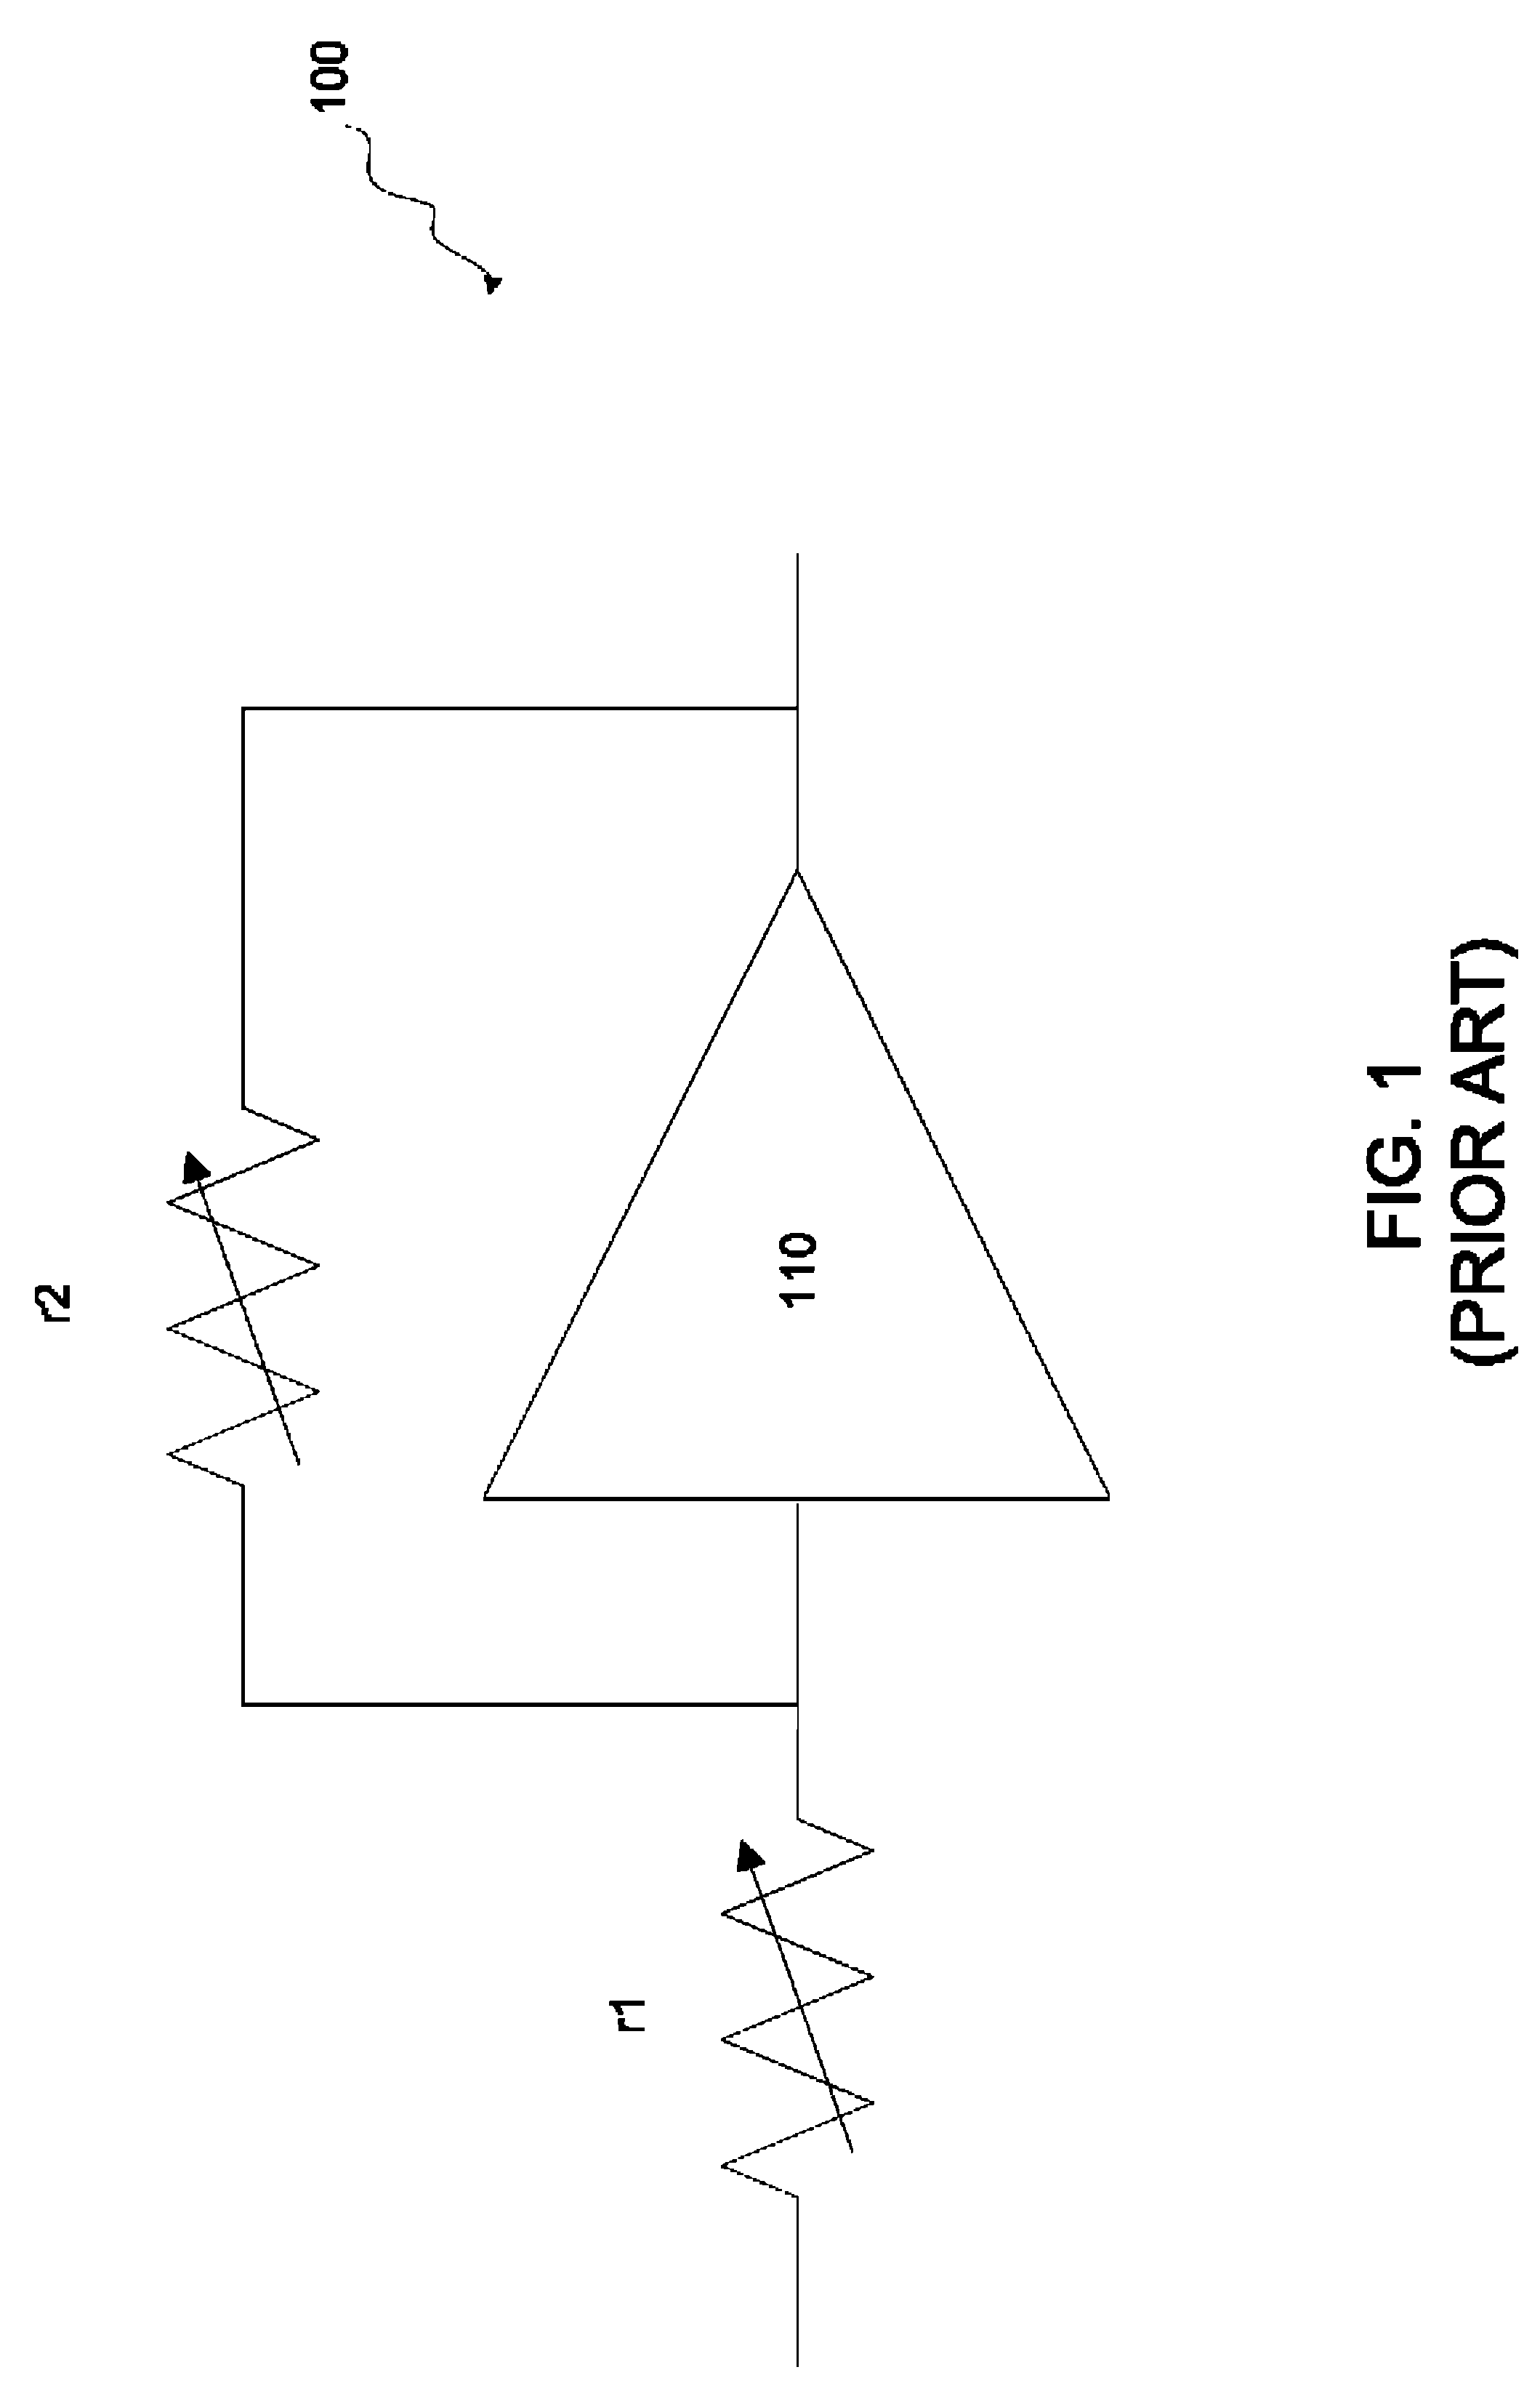 Feedback amplifier and audio system thererof